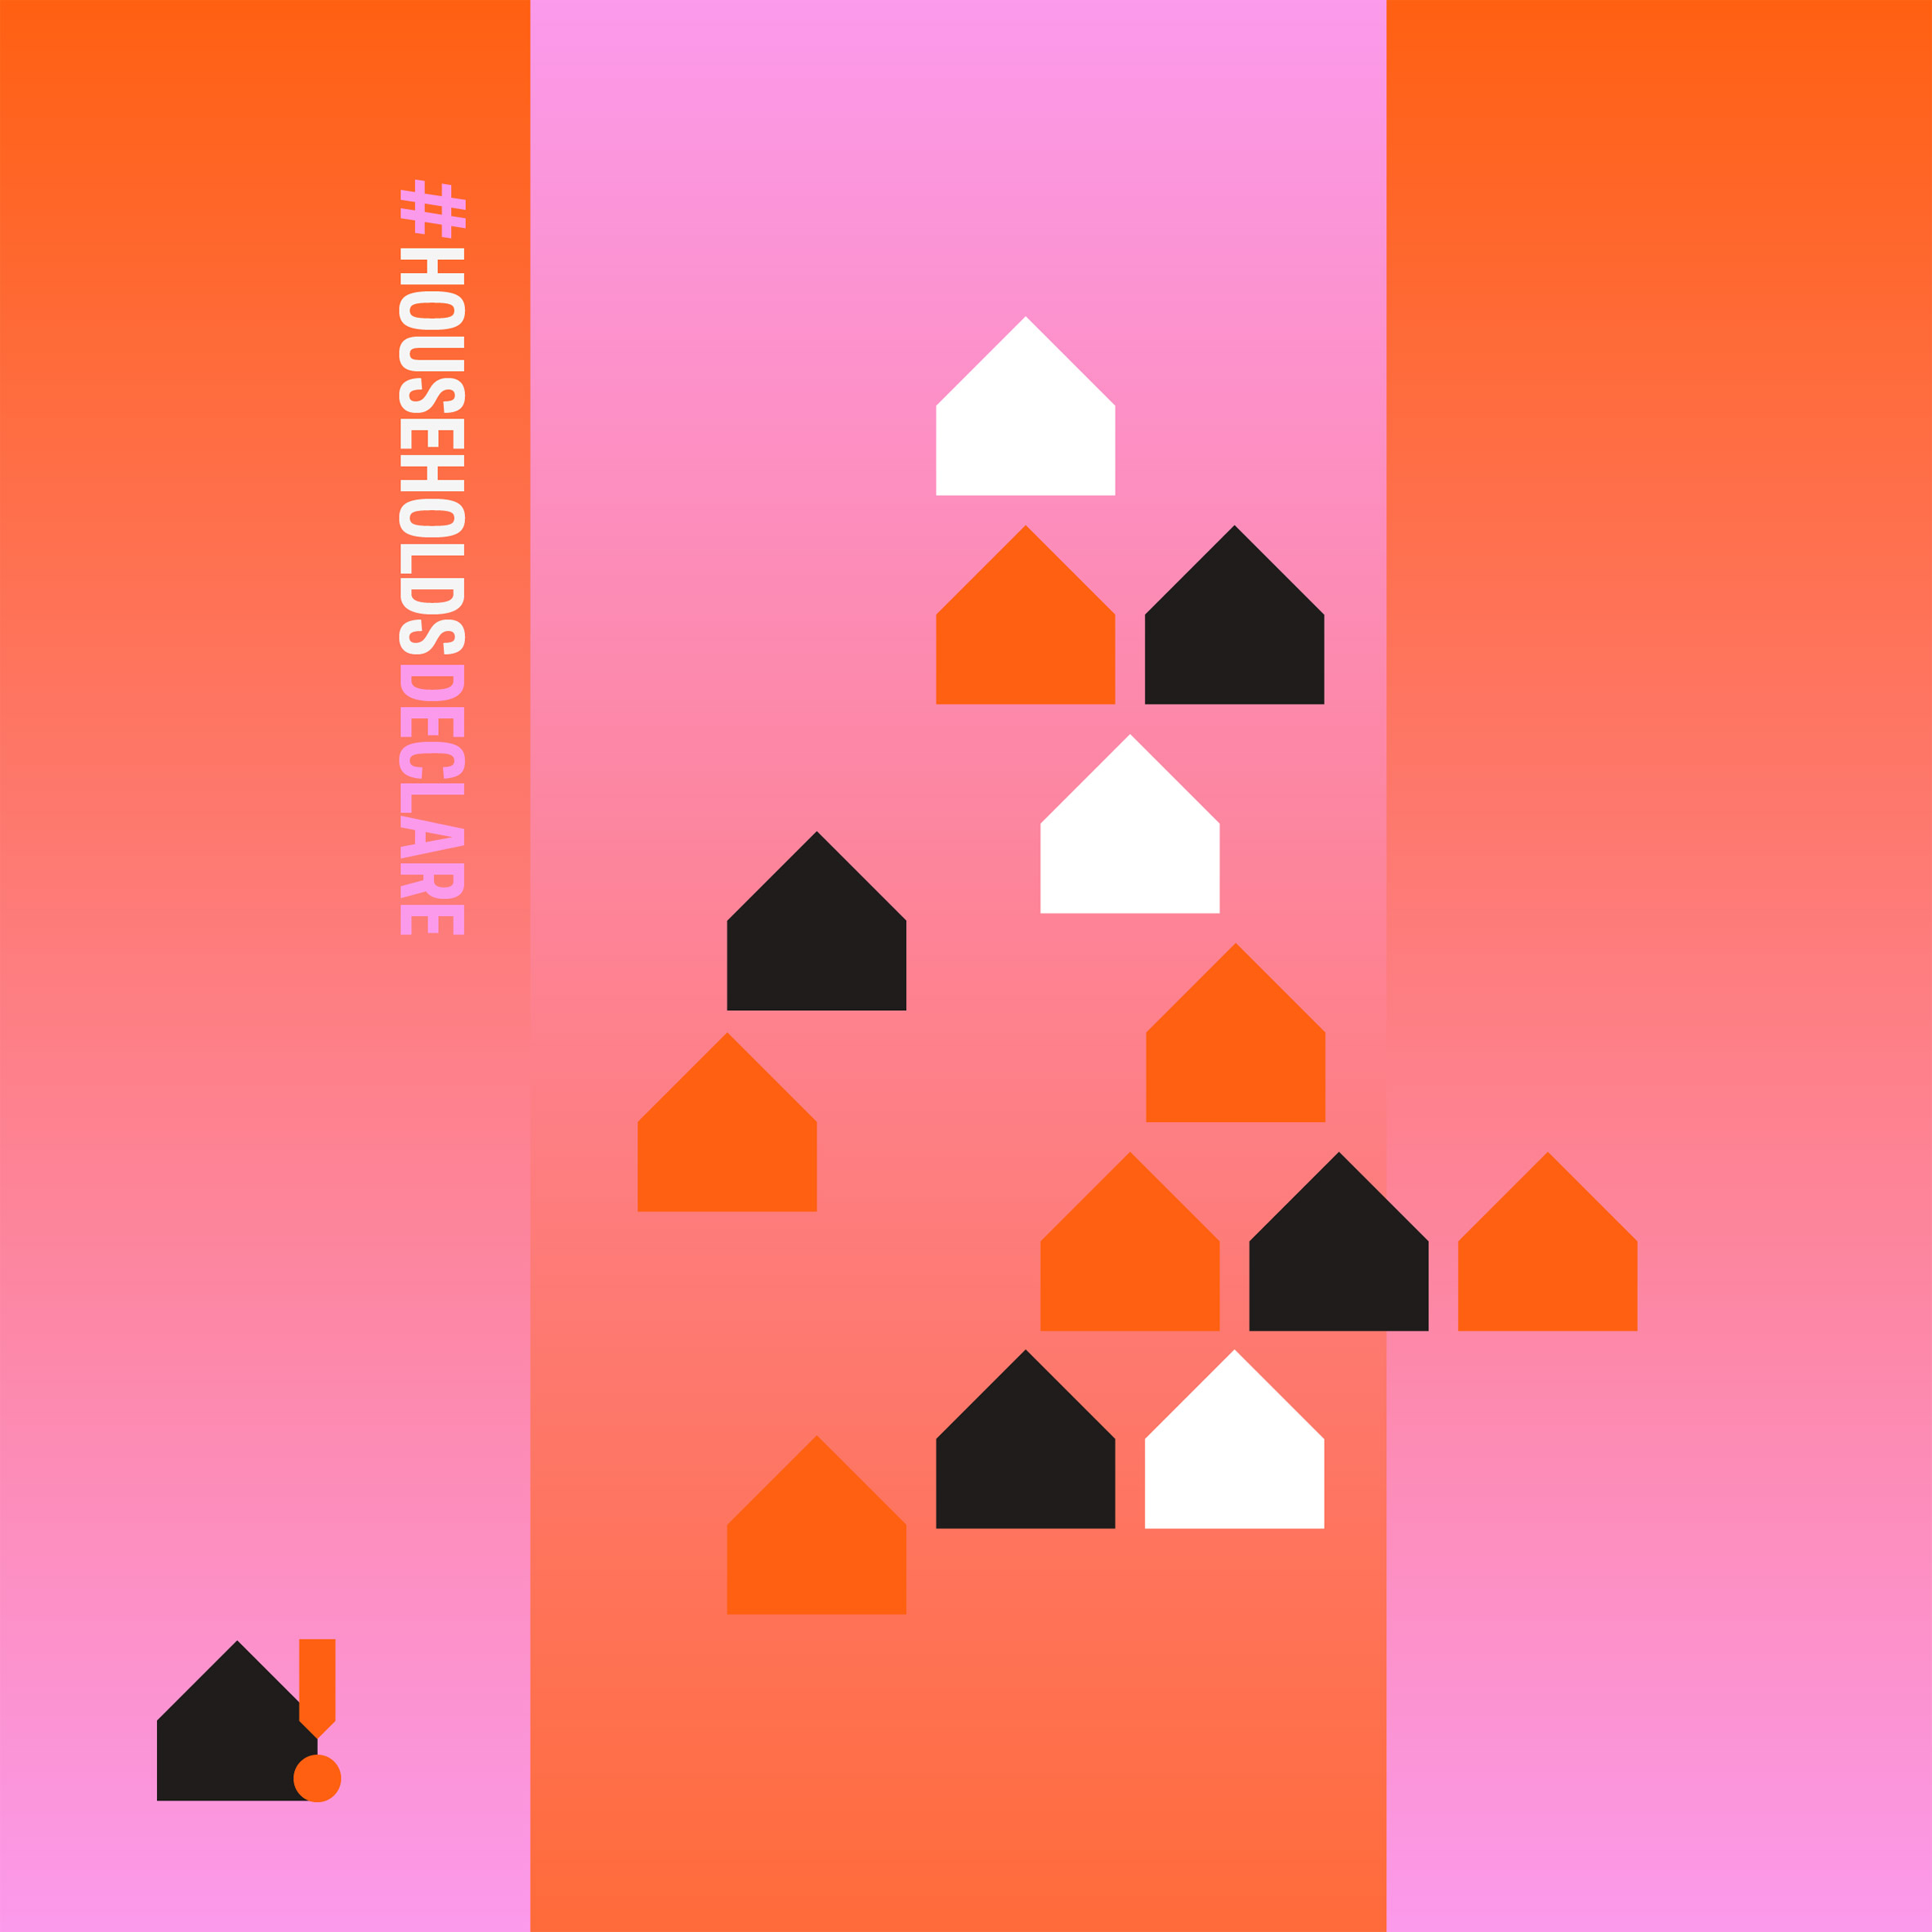 Colourful graphic of houses